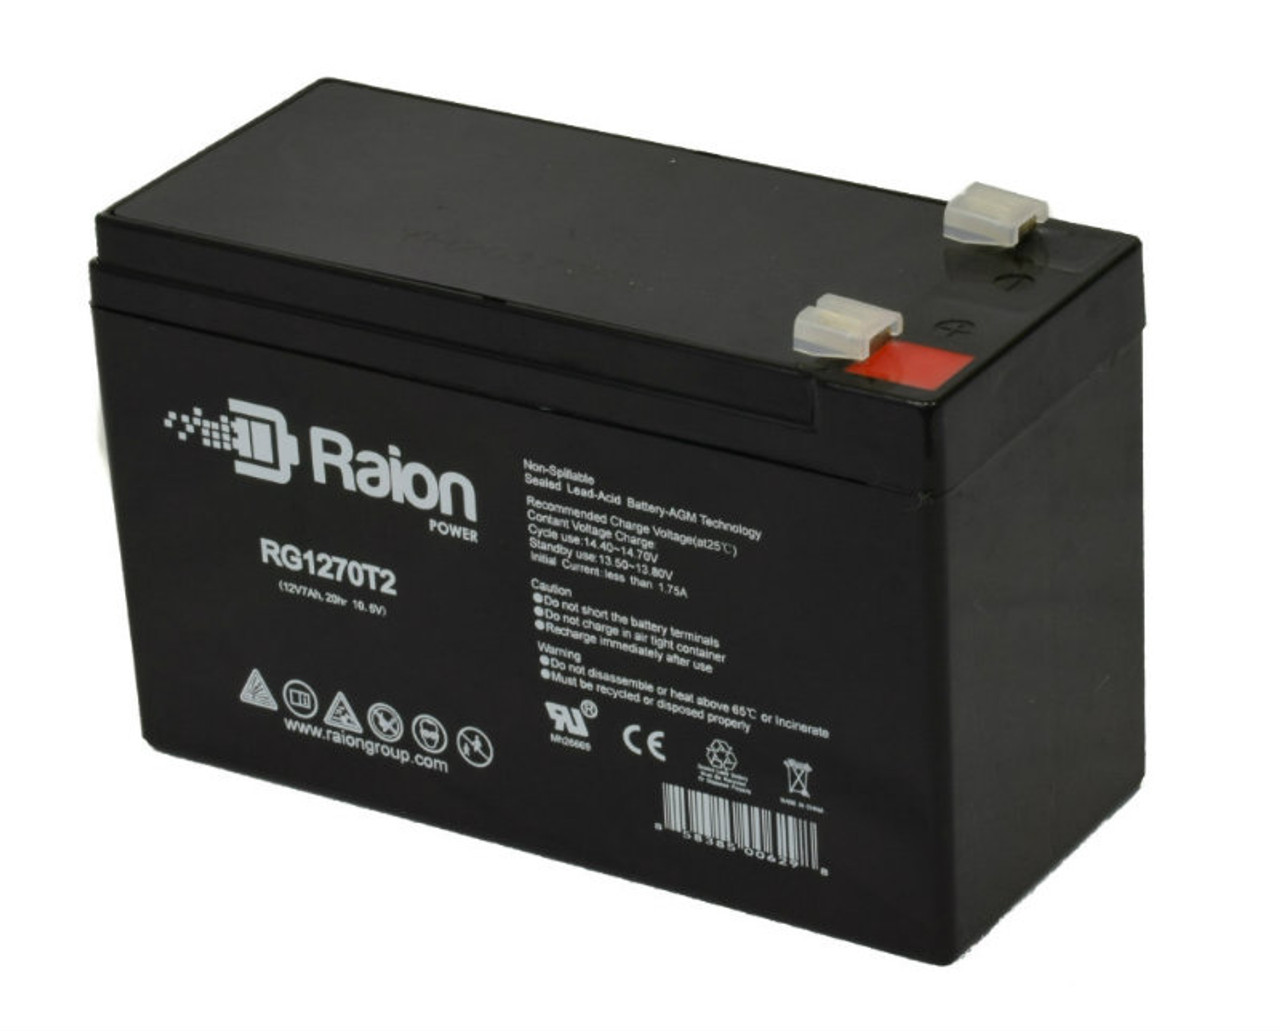 Raion Power RG1270T1 12V 7Ah Non-Spillable Replacement Battery for Sunnyway SW1275